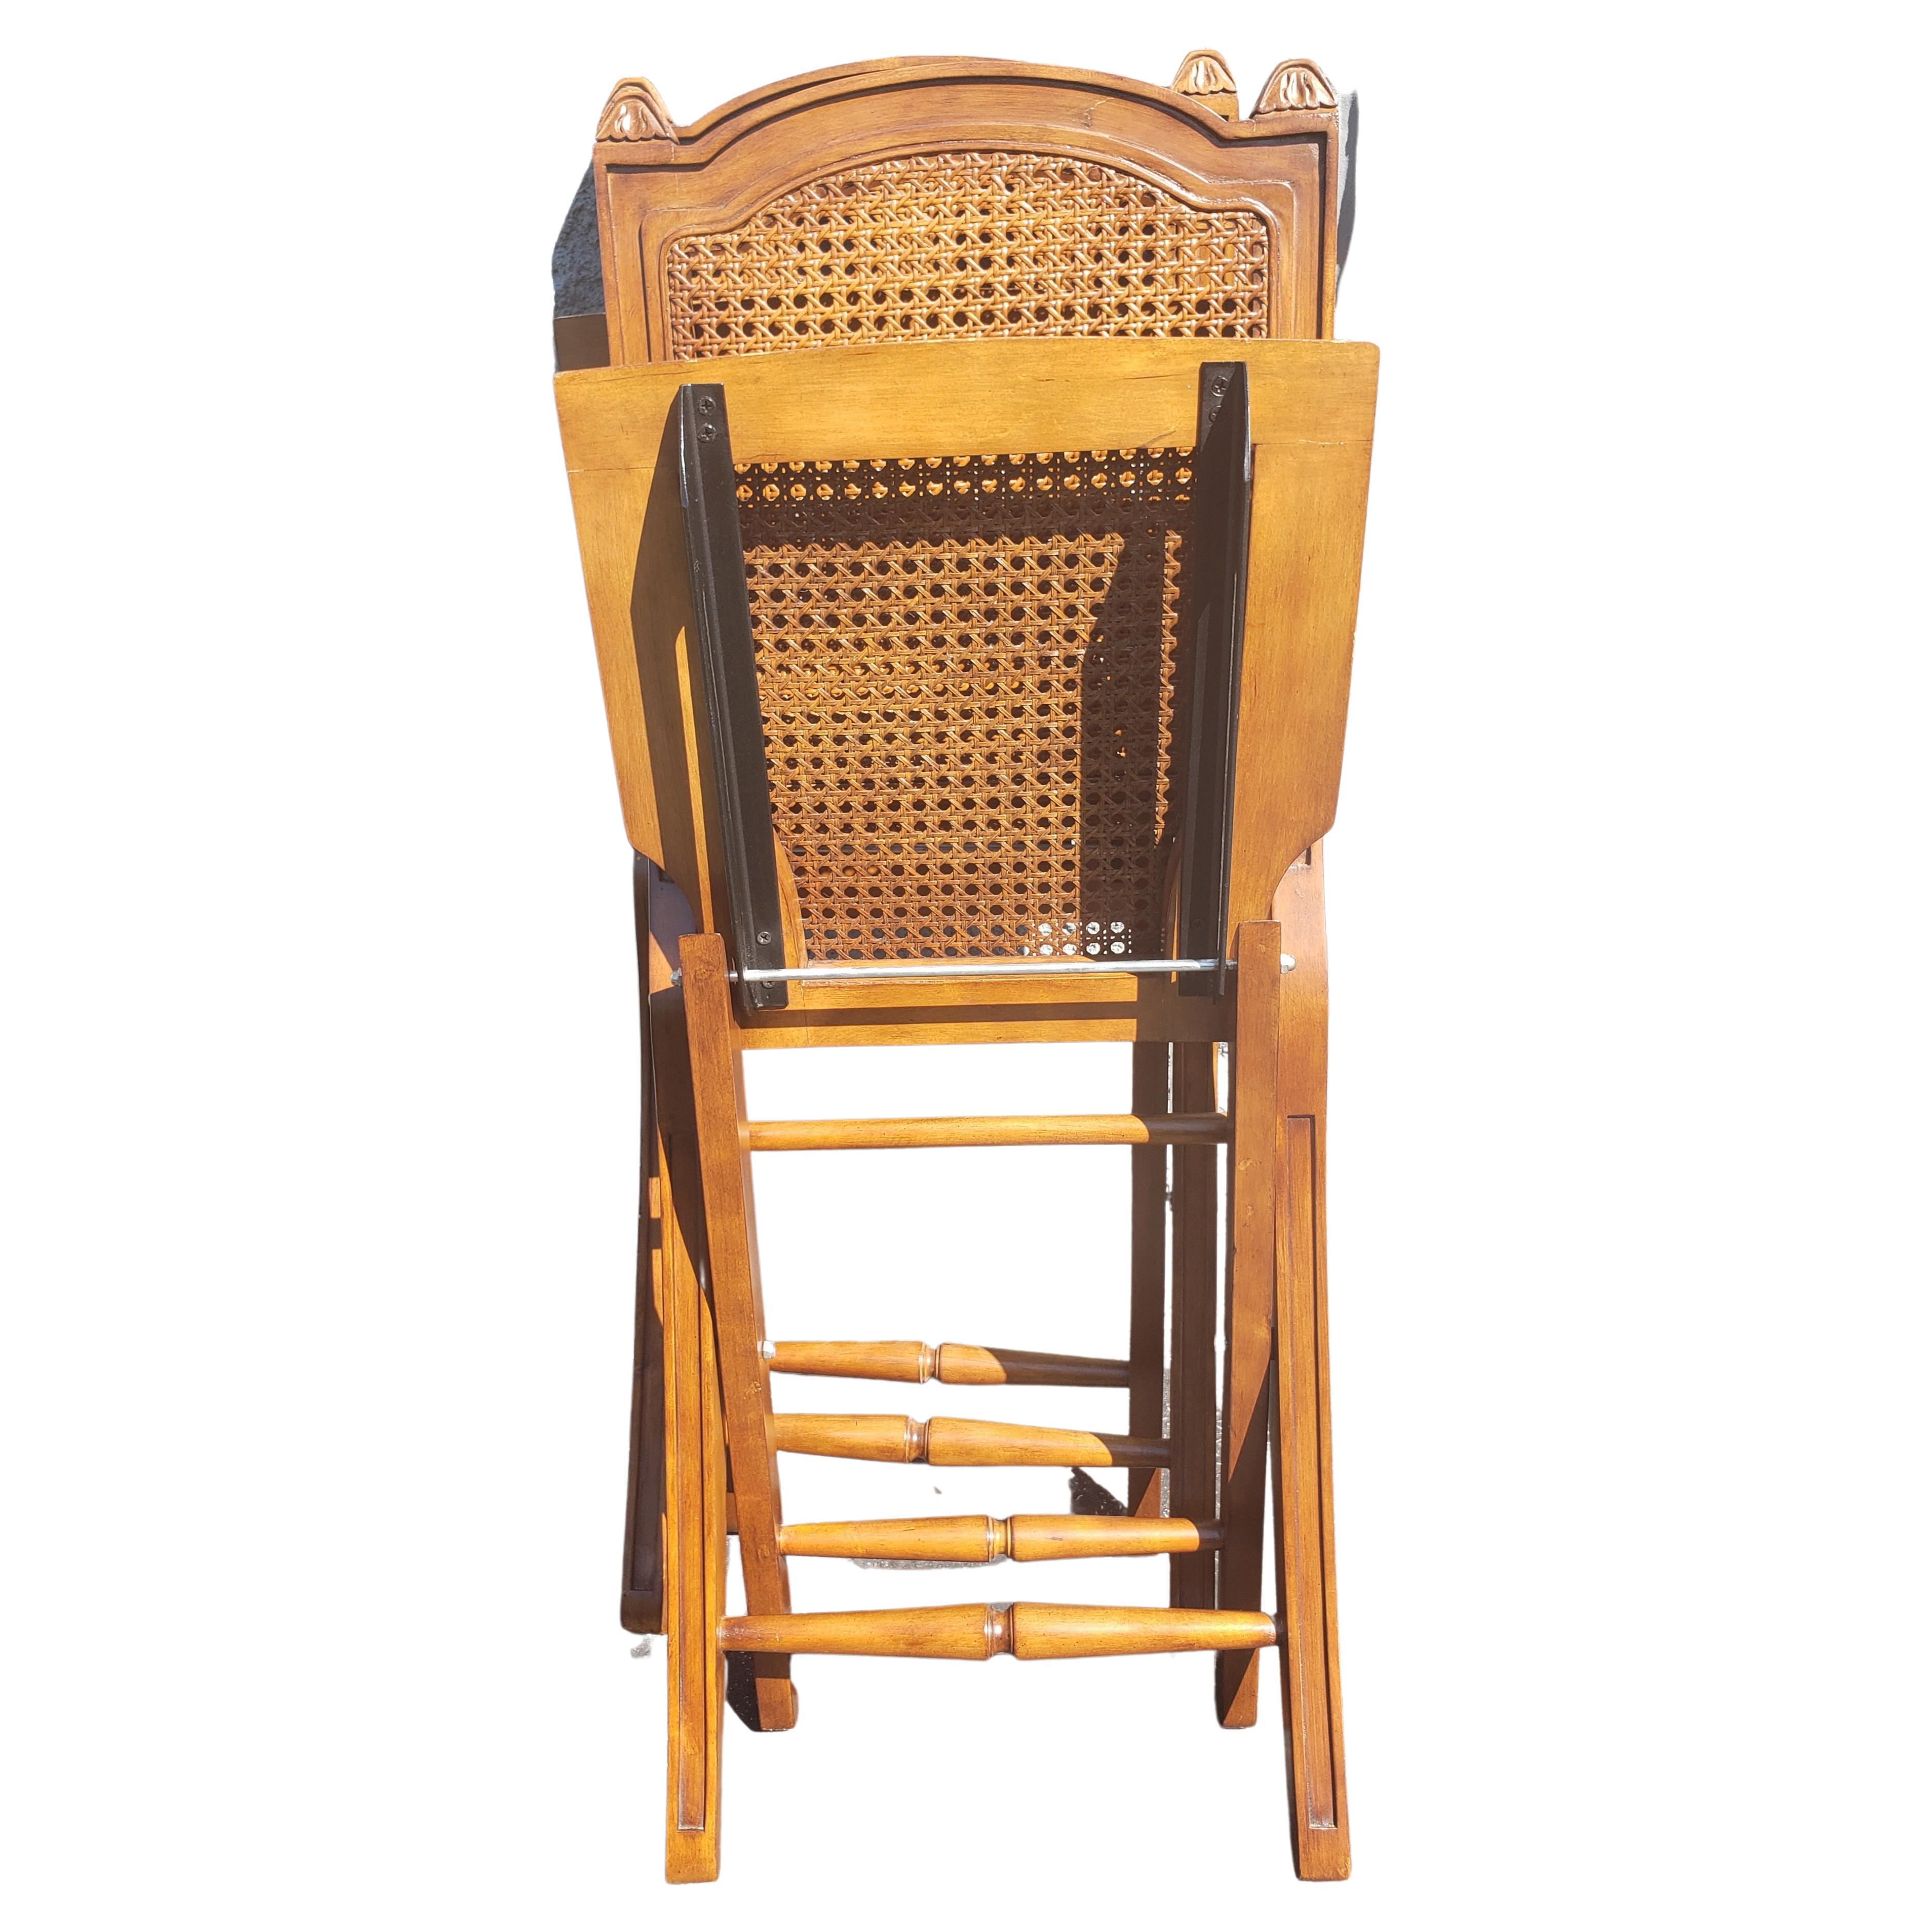 Solid Cherry and Cane Seat and Back Folding Chairs with Cushions, a Pair In Good Condition For Sale In Germantown, MD